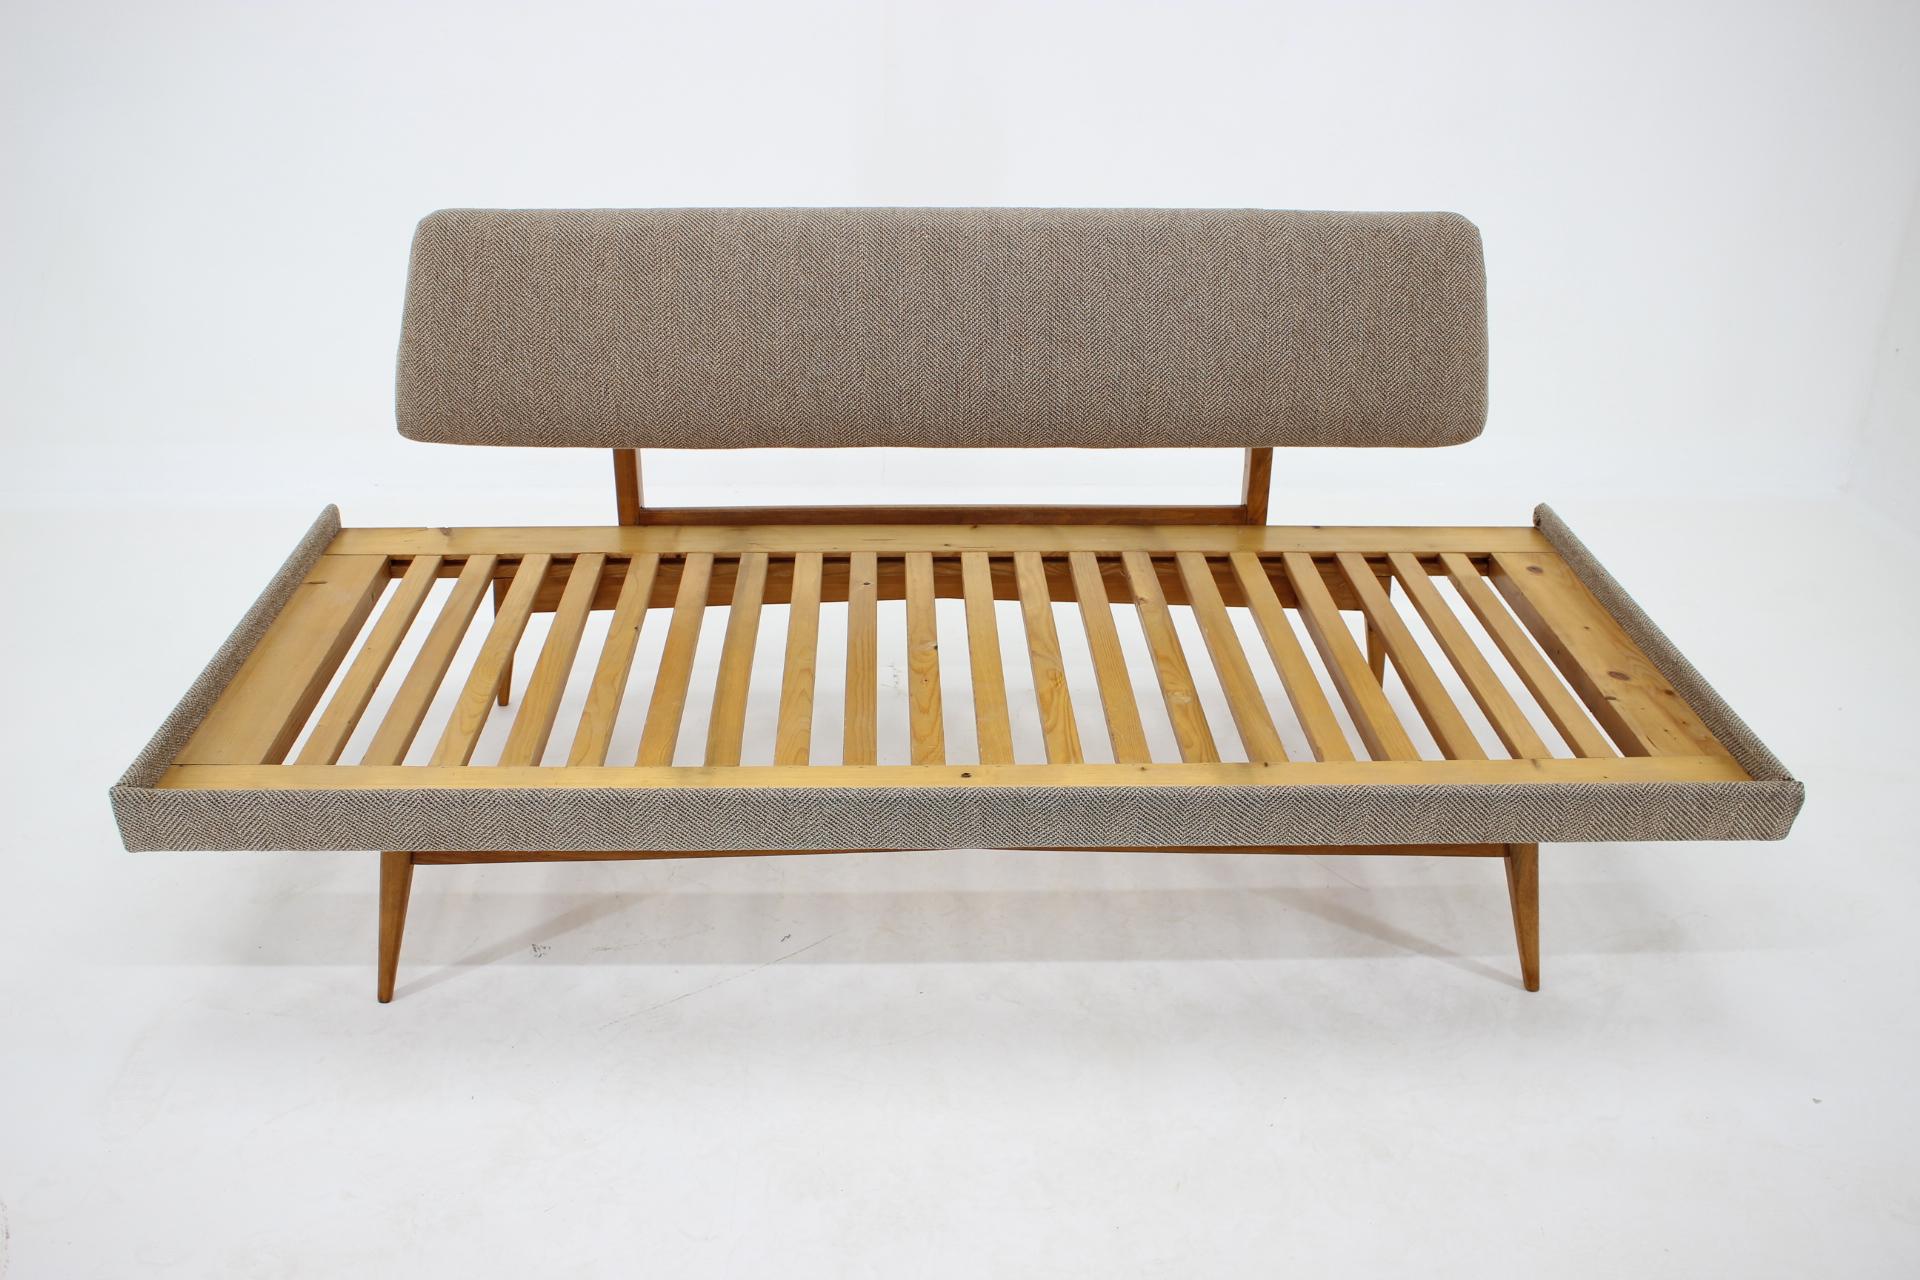 Unique and beautiful adjustable sofa in style of Knoll - around 1960s/ 1